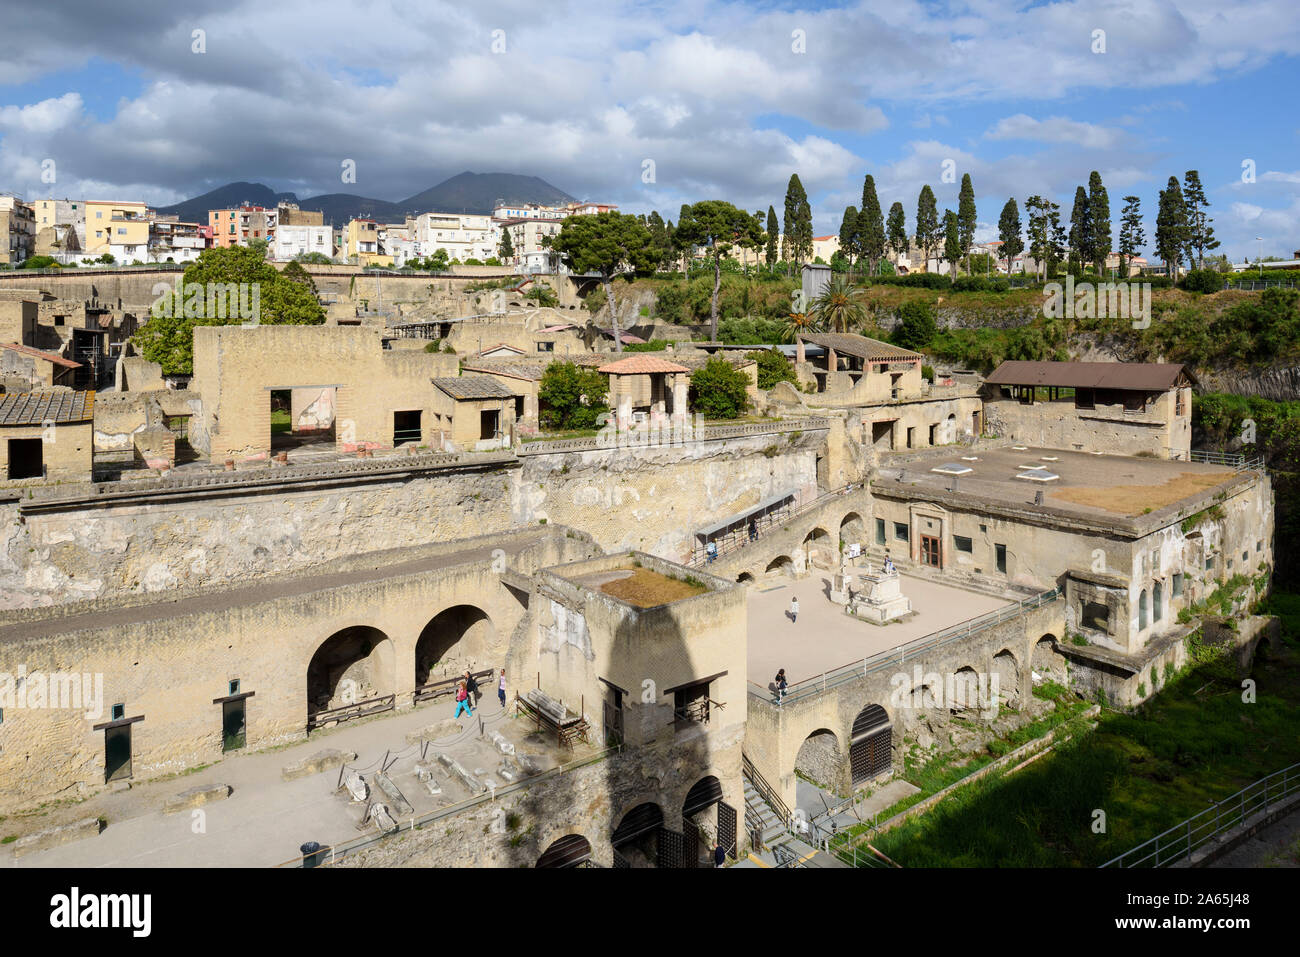 Ercolano. Italy. View of the archaeological site of Herculaneum with the ancient shoreline in foreground, Mount Vesuvius can be seen in the background Stock Photo